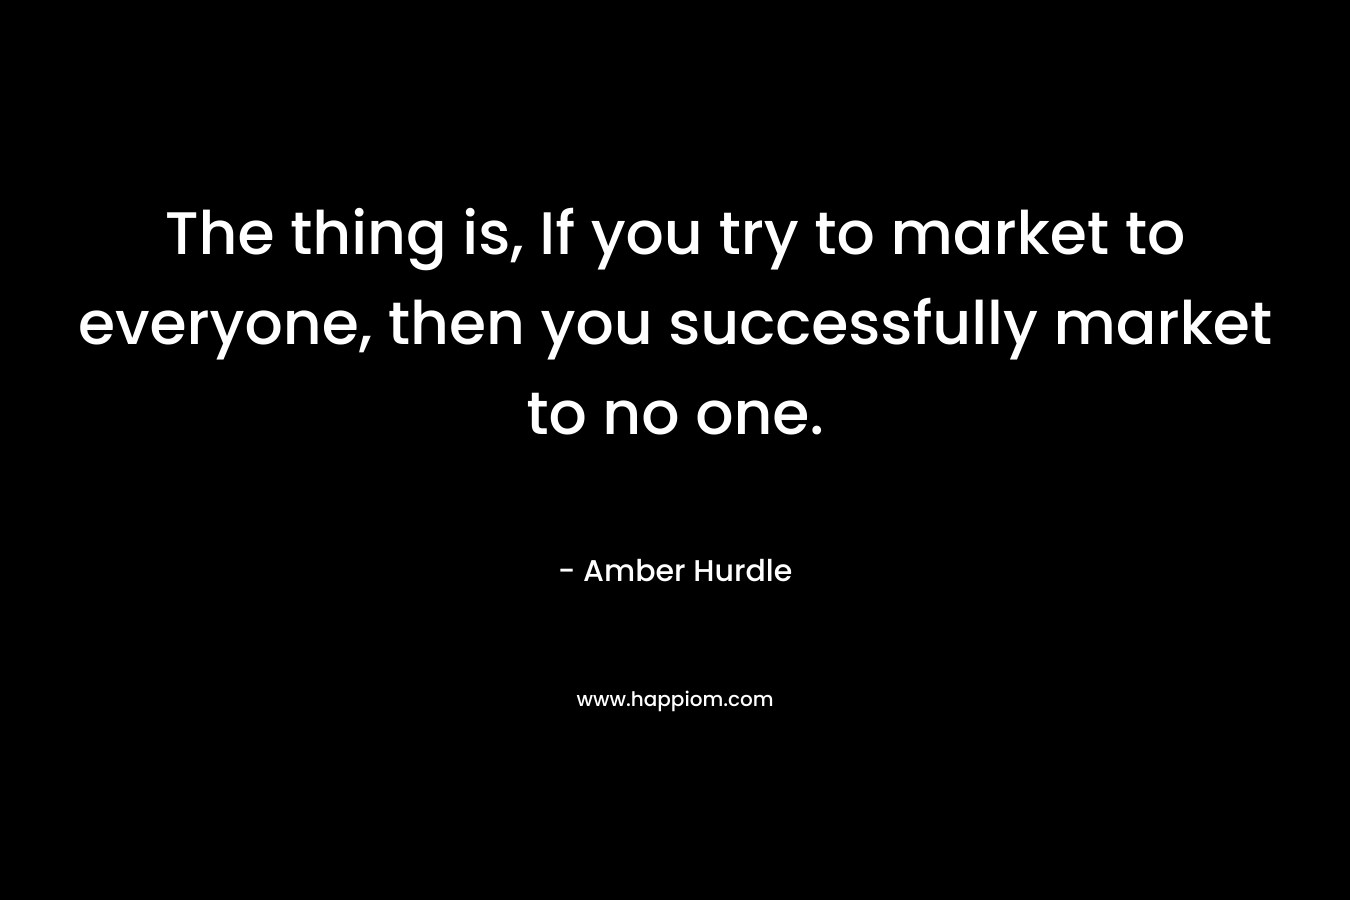 The thing is, If you try to market to everyone, then you successfully market to no one.